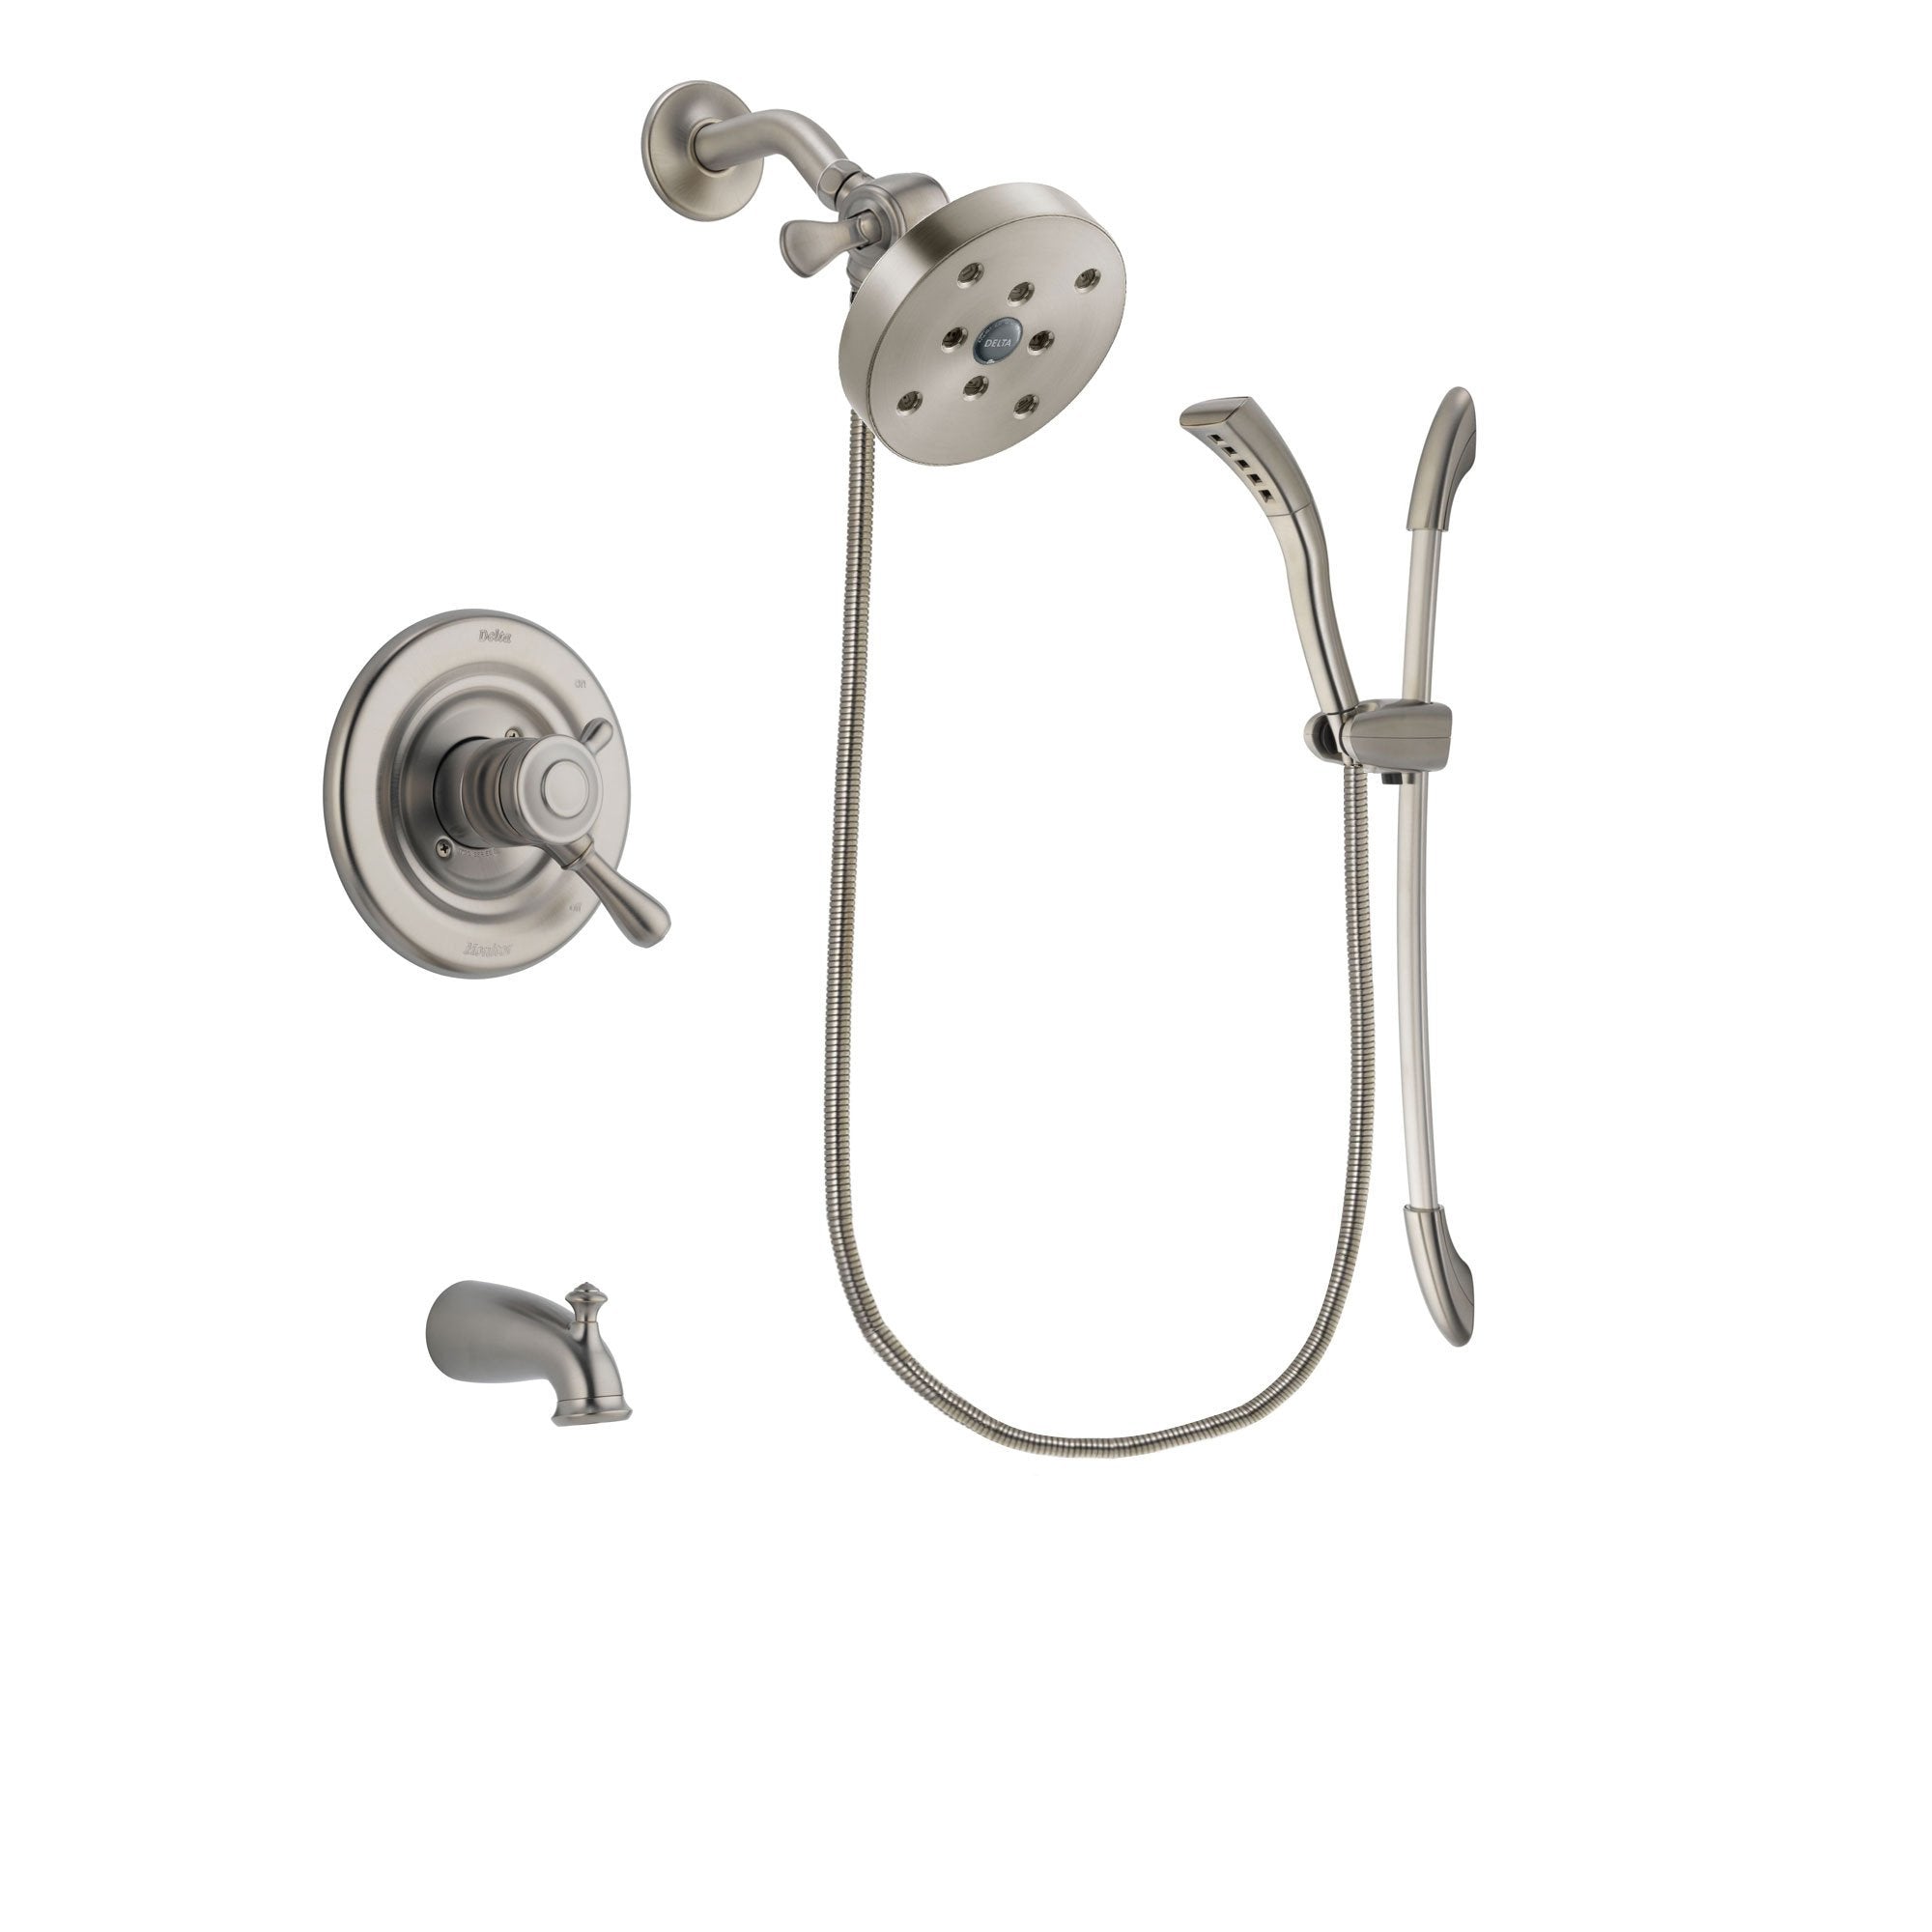 Delta Leland Stainless Steel Finish Dual Control Tub and Shower Faucet System Package with 5-1/2 inch Shower Head and Handshower with Slide Bar Includes Rough-in Valve and Tub Spout DSP1505V